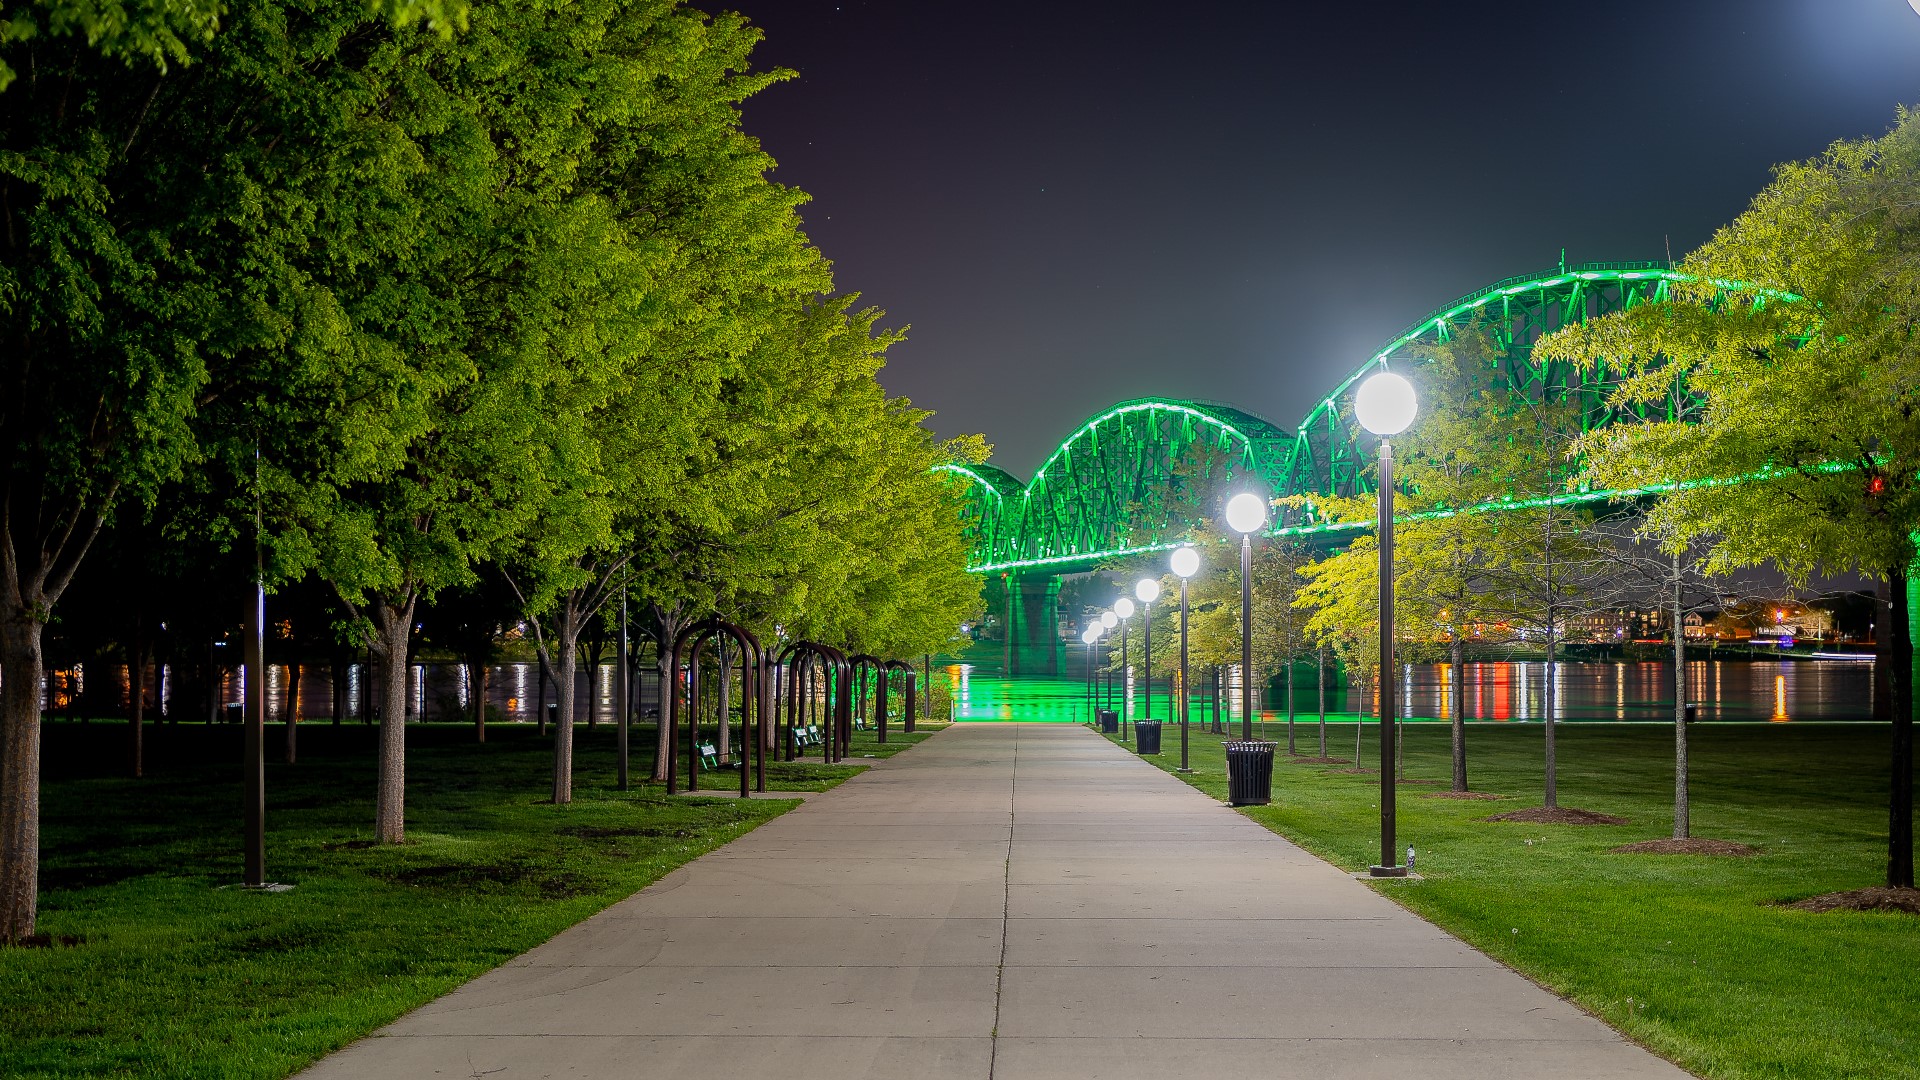 The Louisville park finished sixth in the voting poll, a total of 20 waterfront areas across the country competed for a spot in the top ten.